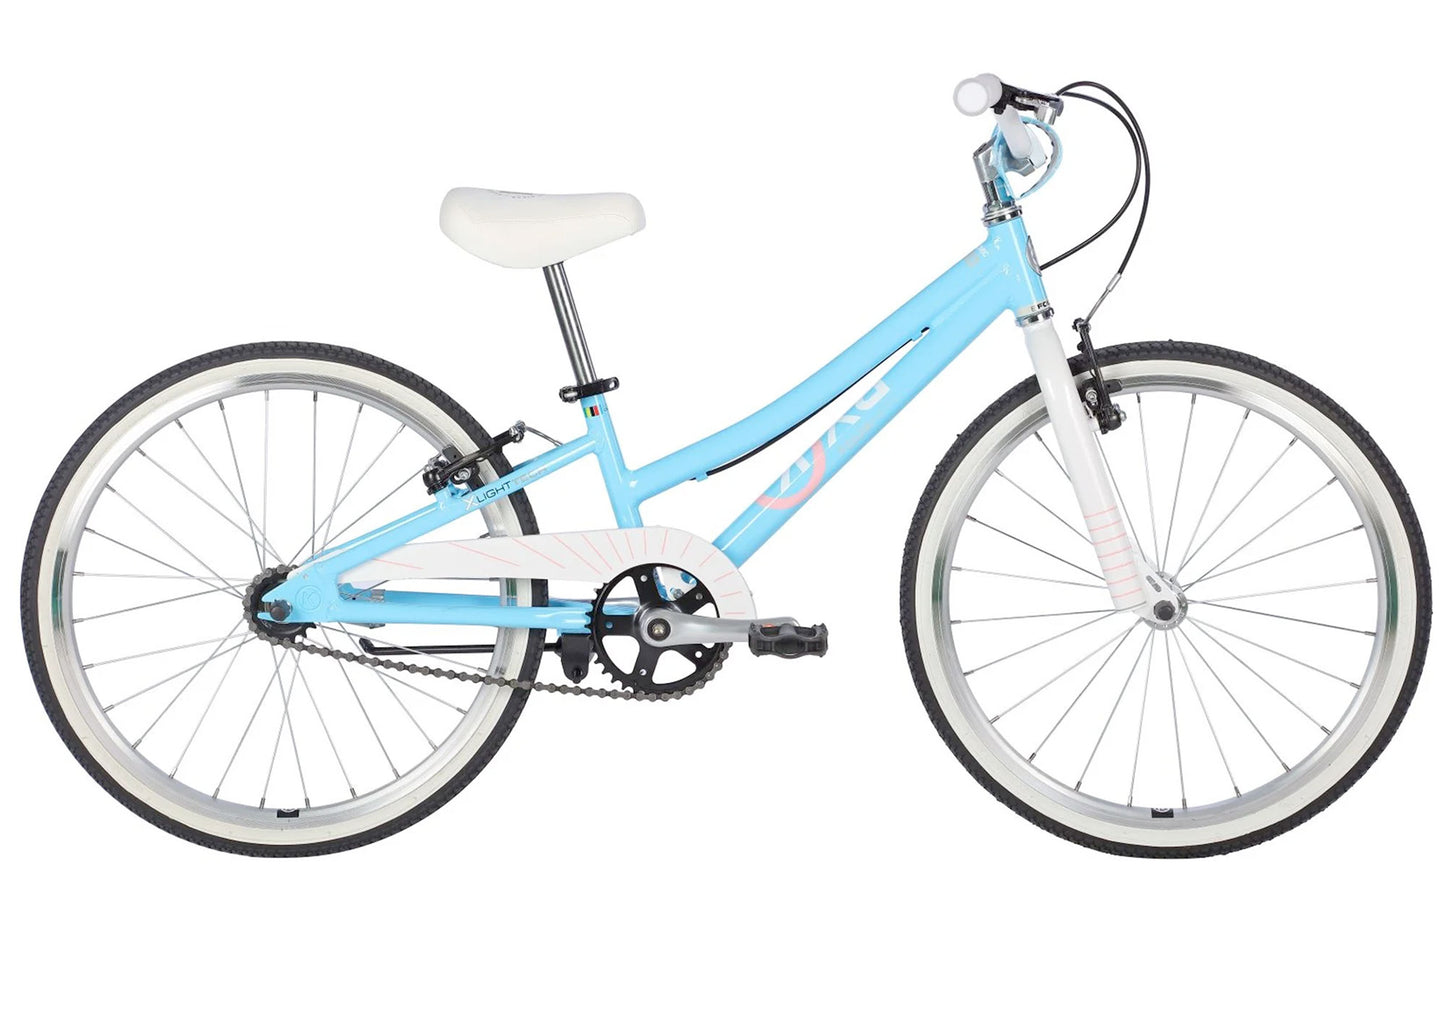 BYK E450 Girl's Single Speed Bicycle, Sky Blue - Rider height: 110-132cm